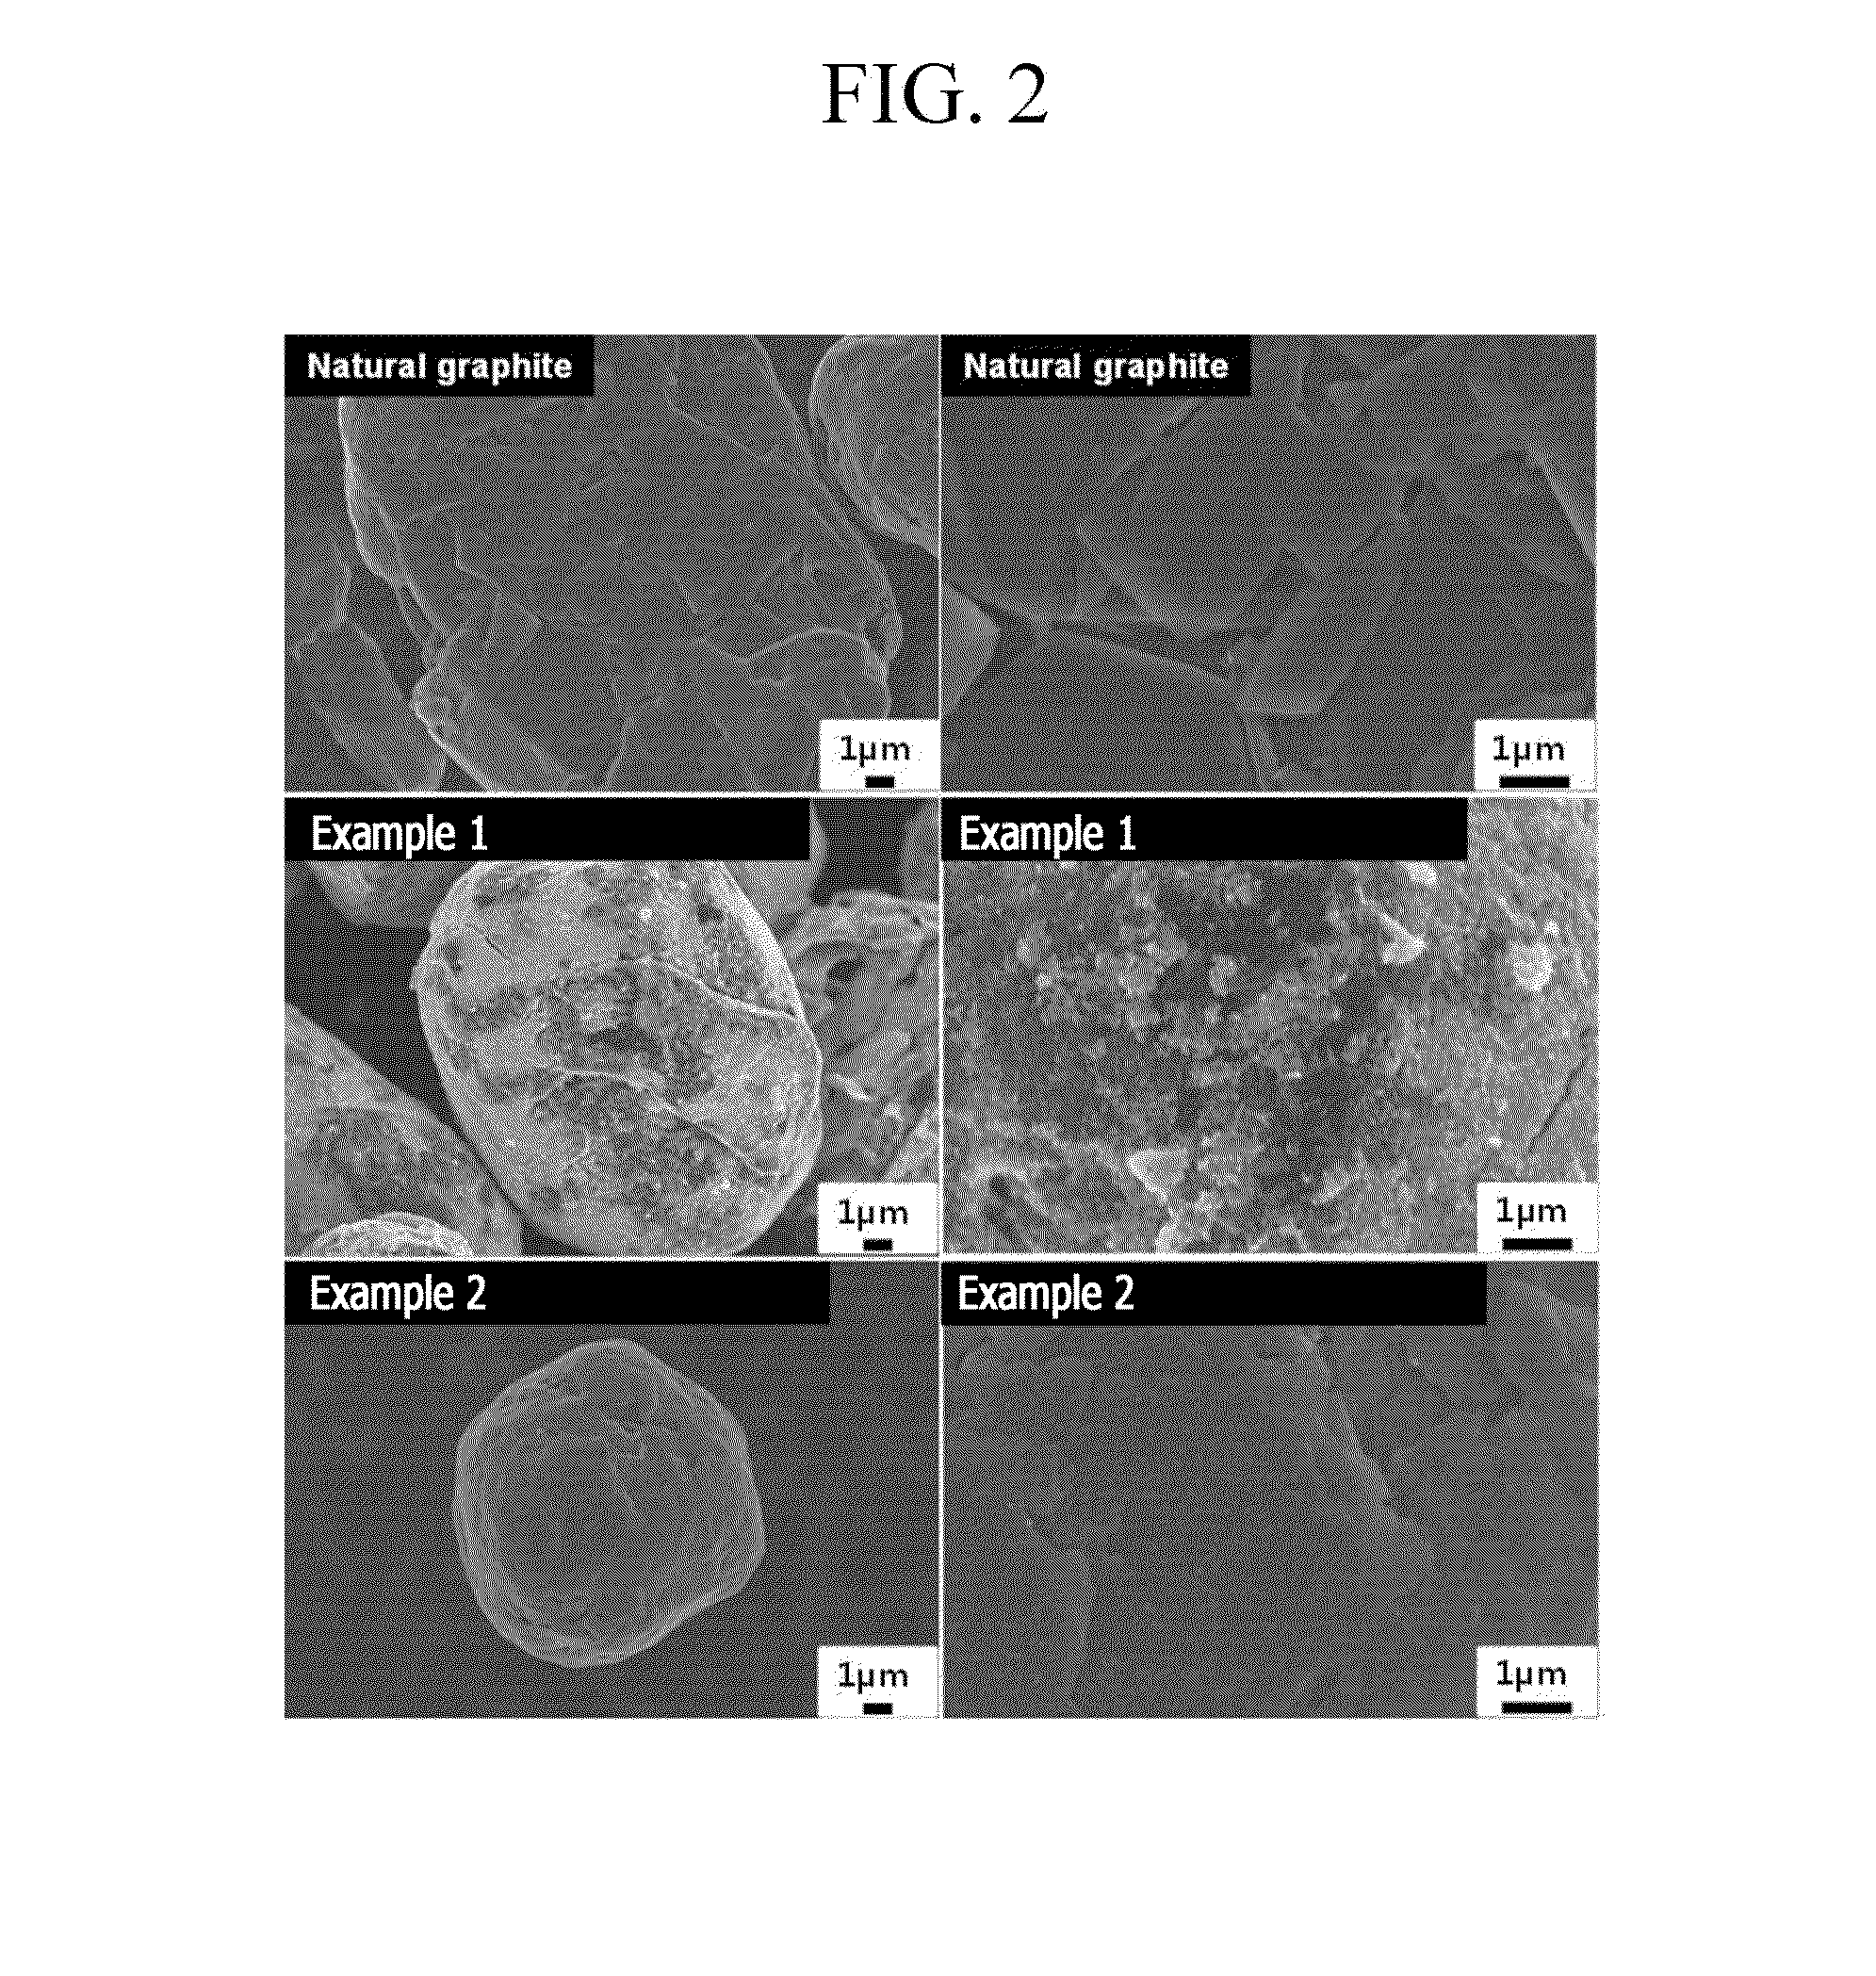 Negative electrode active material, method for manufacturing the same, and lithium rechargable battery including the same